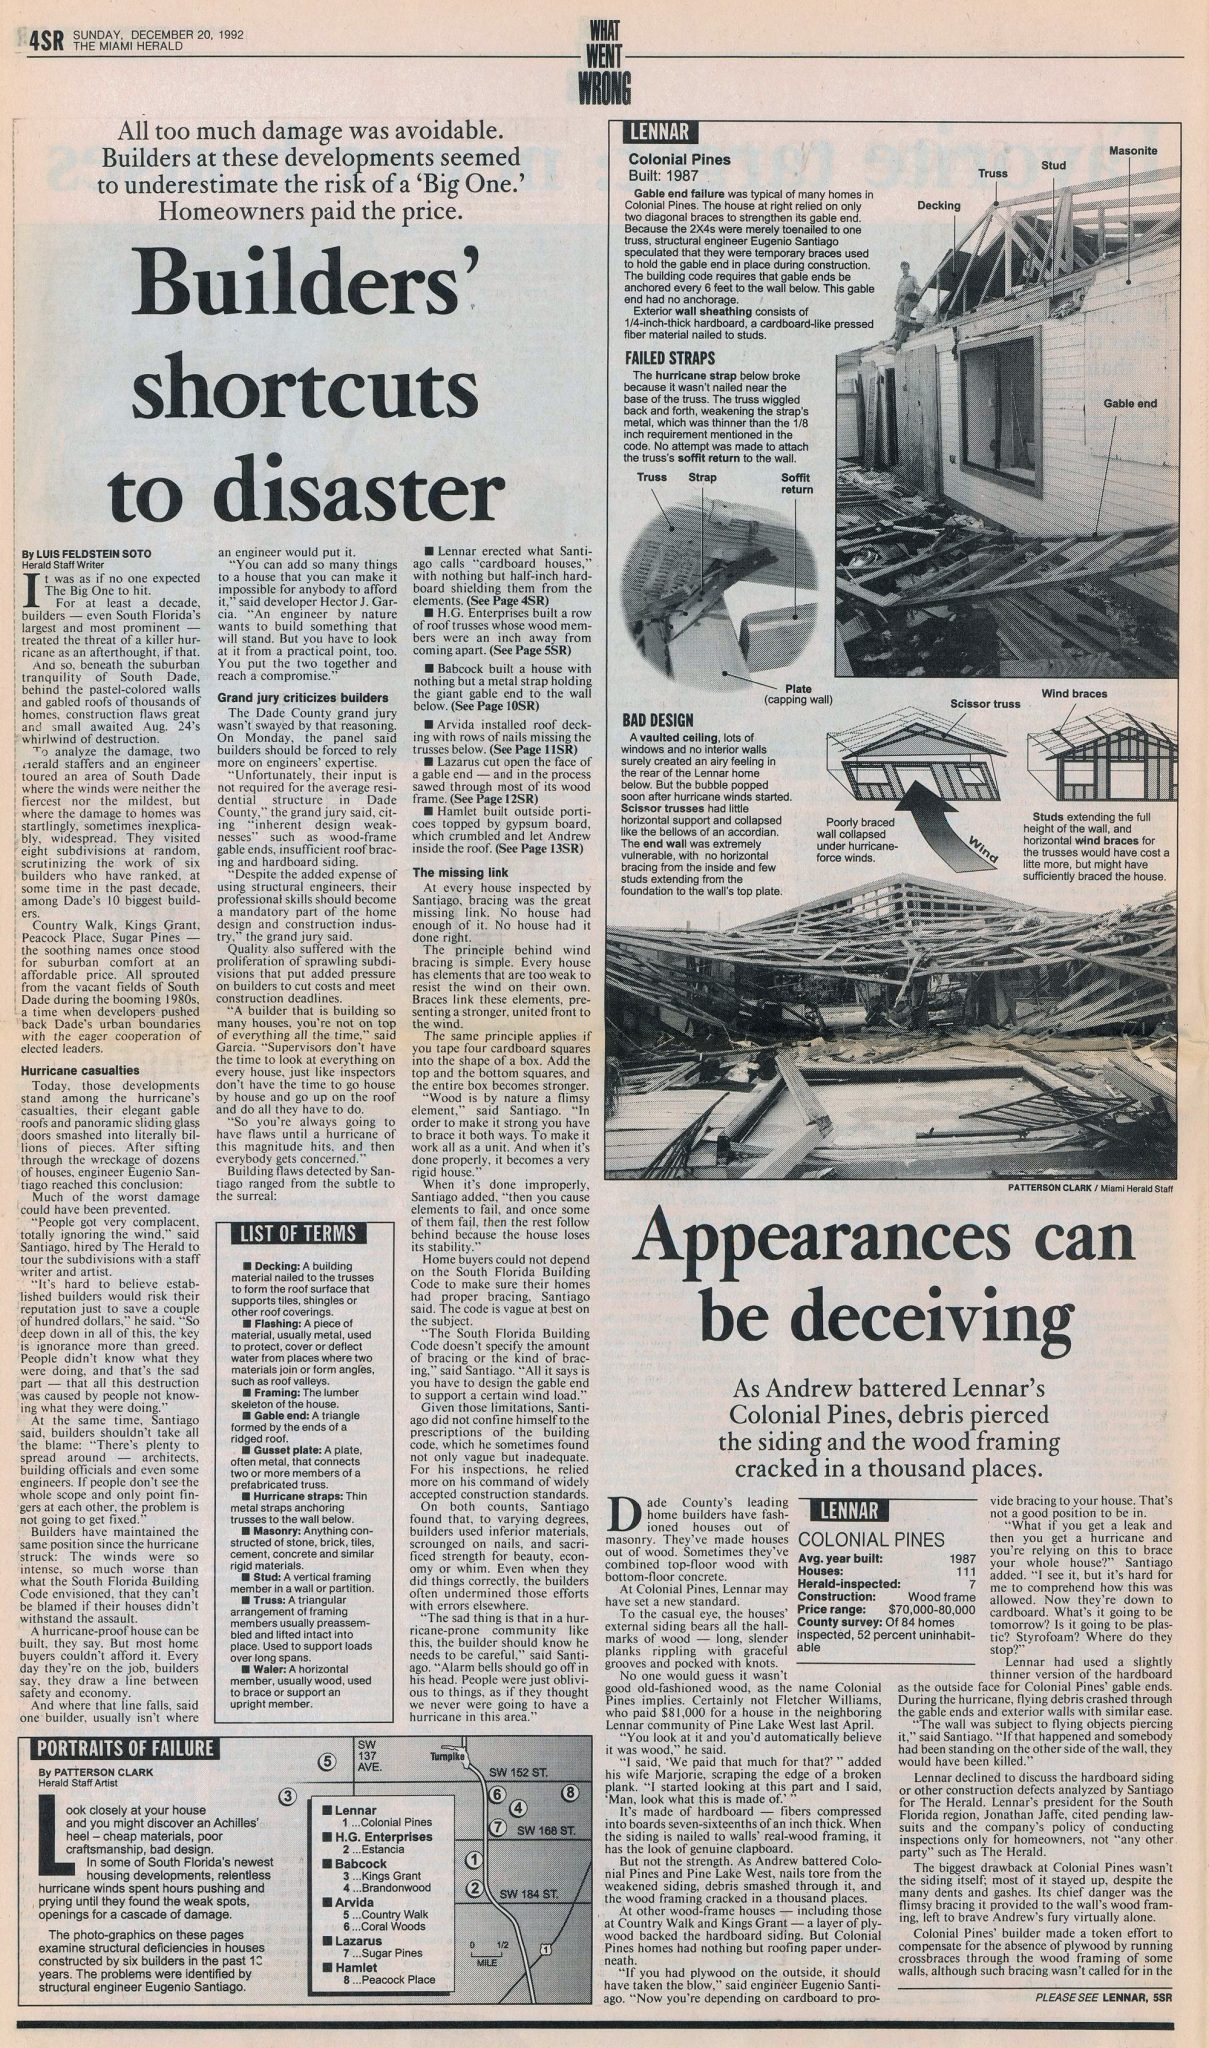 What Went Wrong > Miami Herald, December 20, 1992 > Page 4